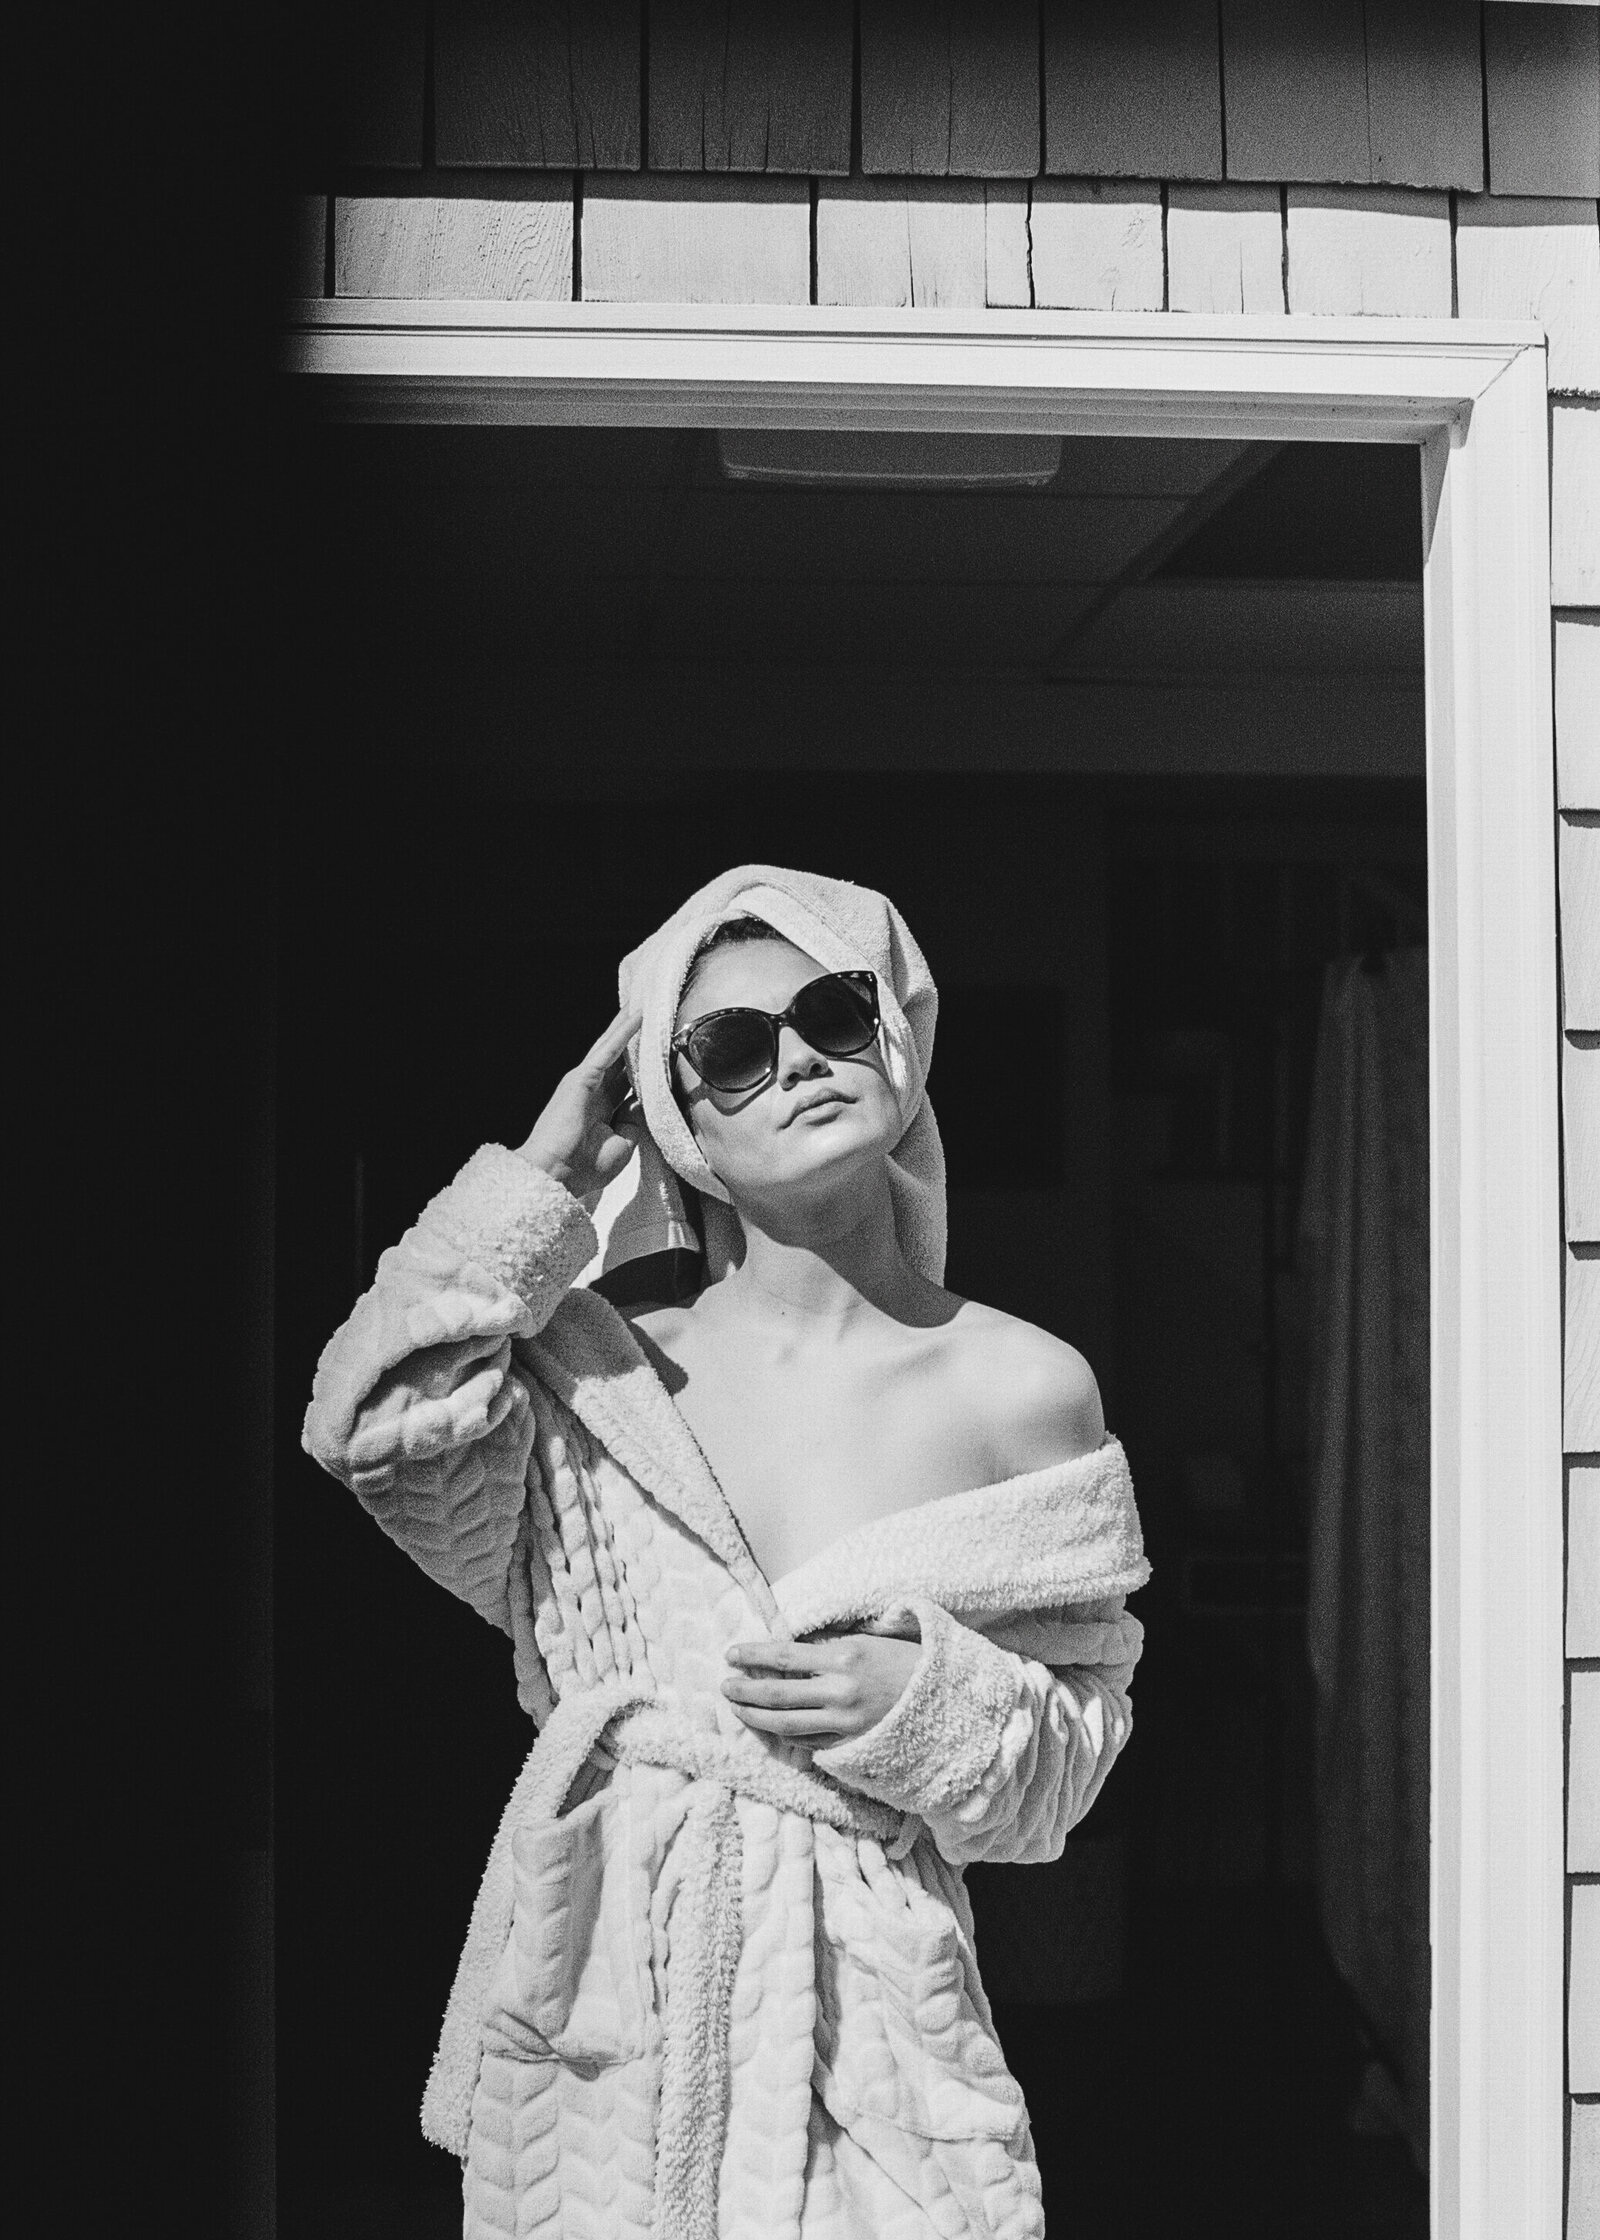 Black and white boudoir photo of woman wearing bathrobe and sunglasses